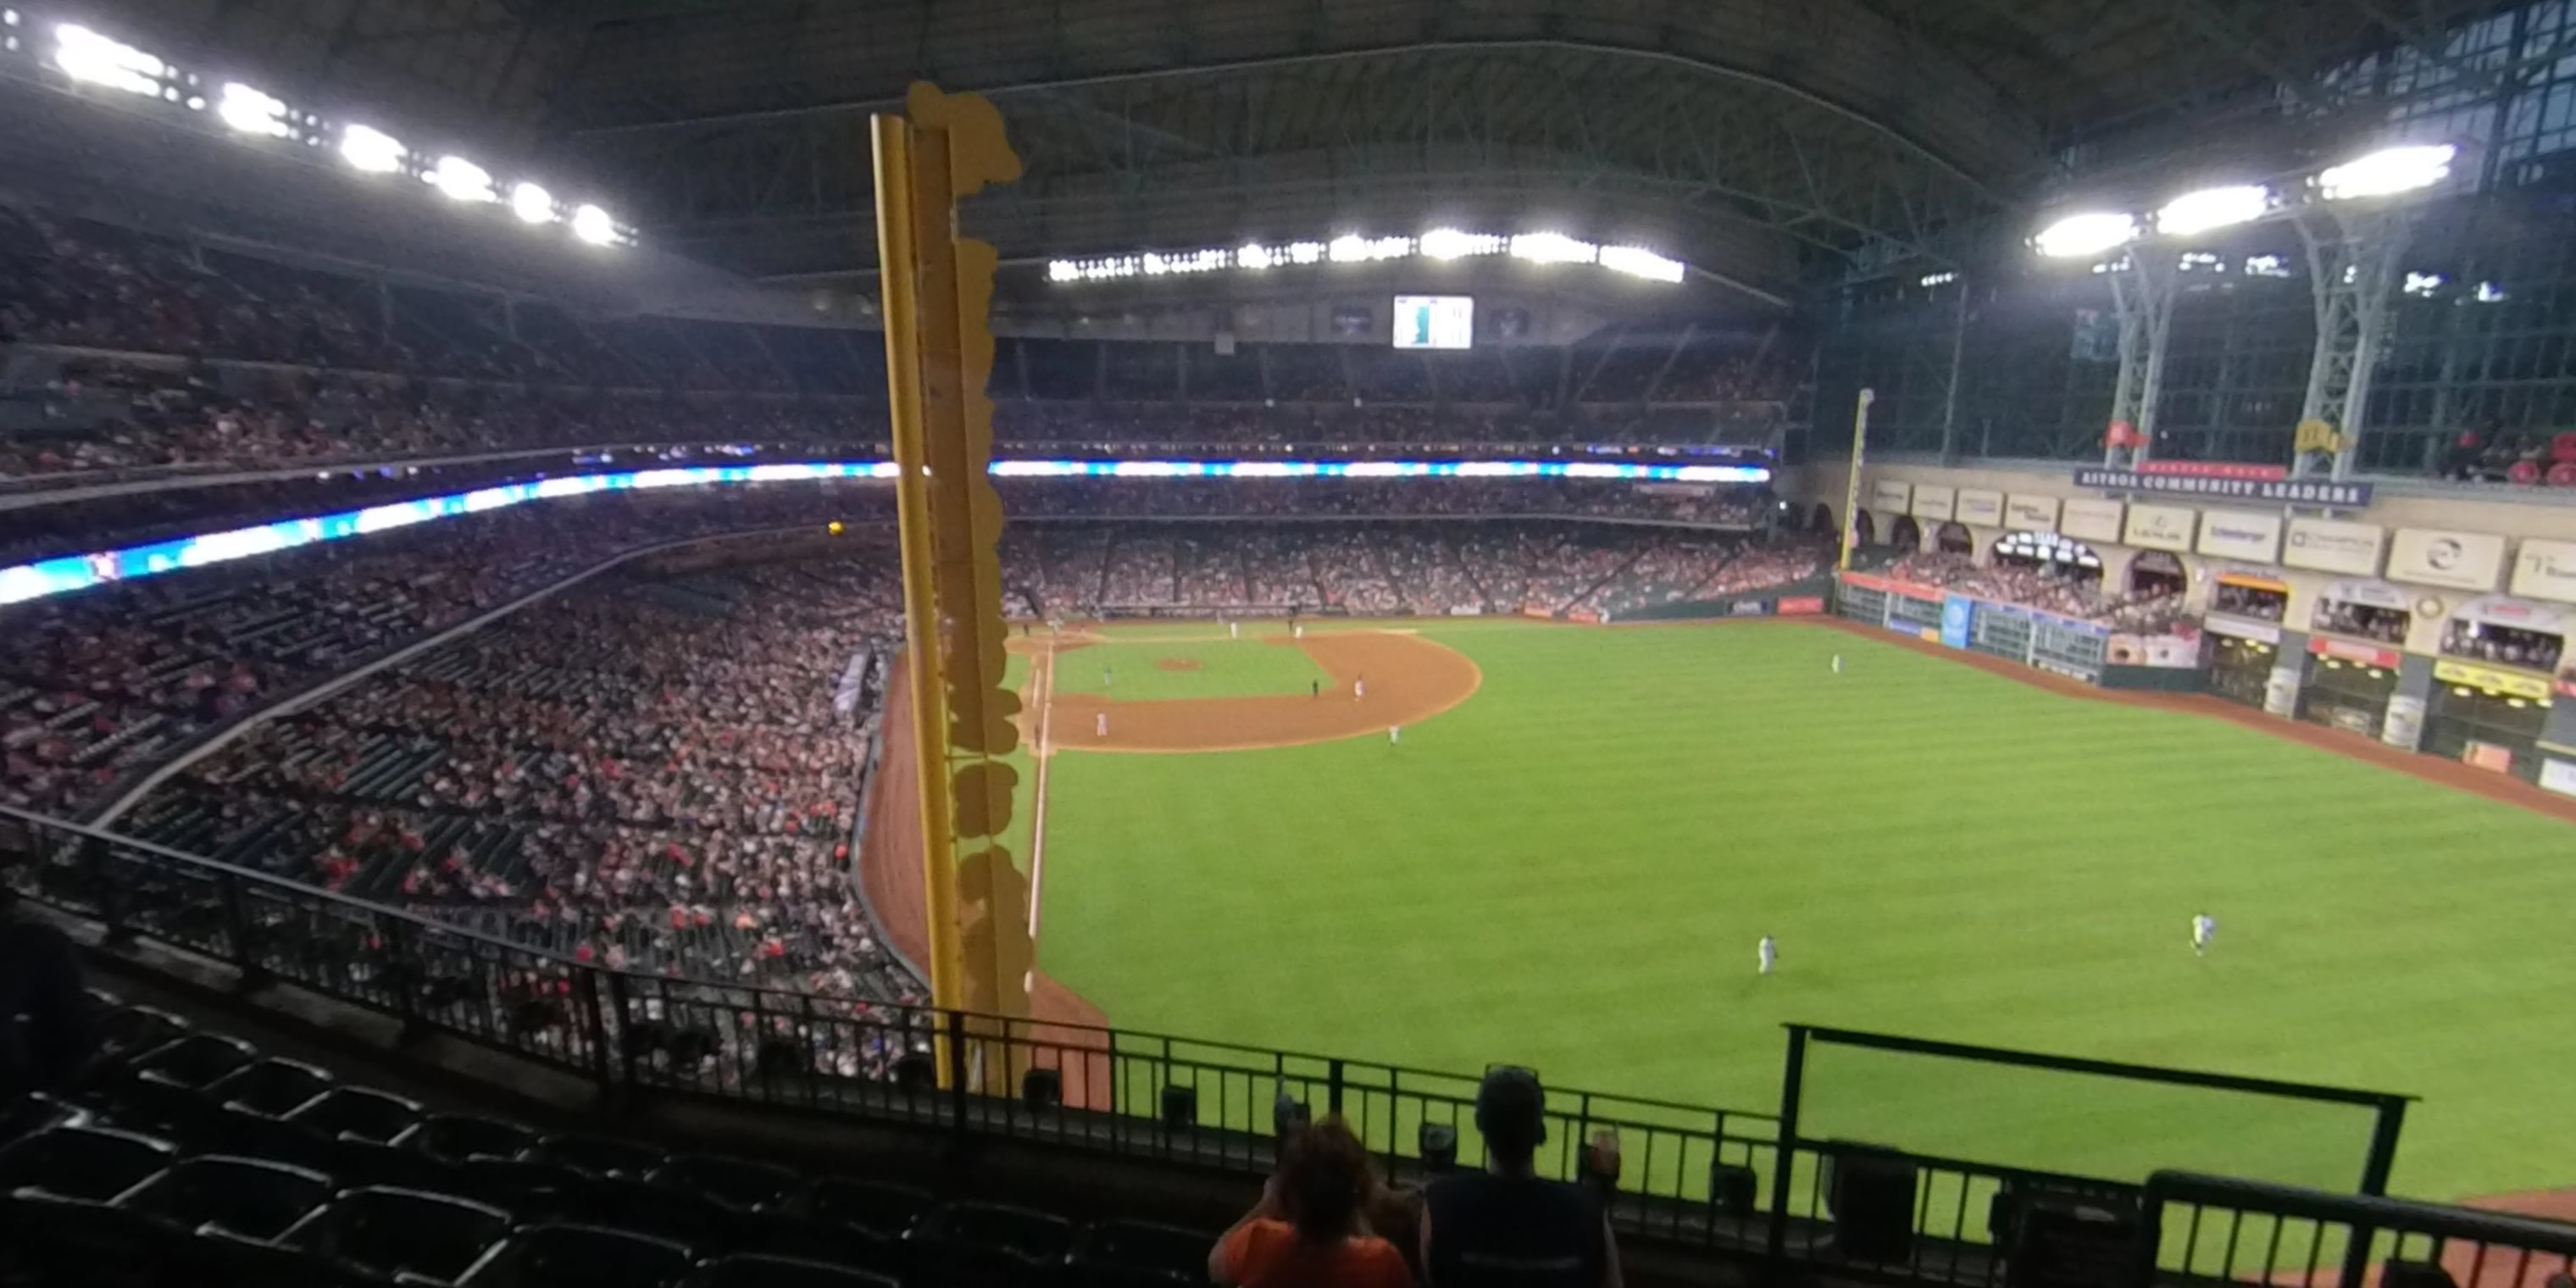 section 337 panoramic seat view  for baseball - minute maid park